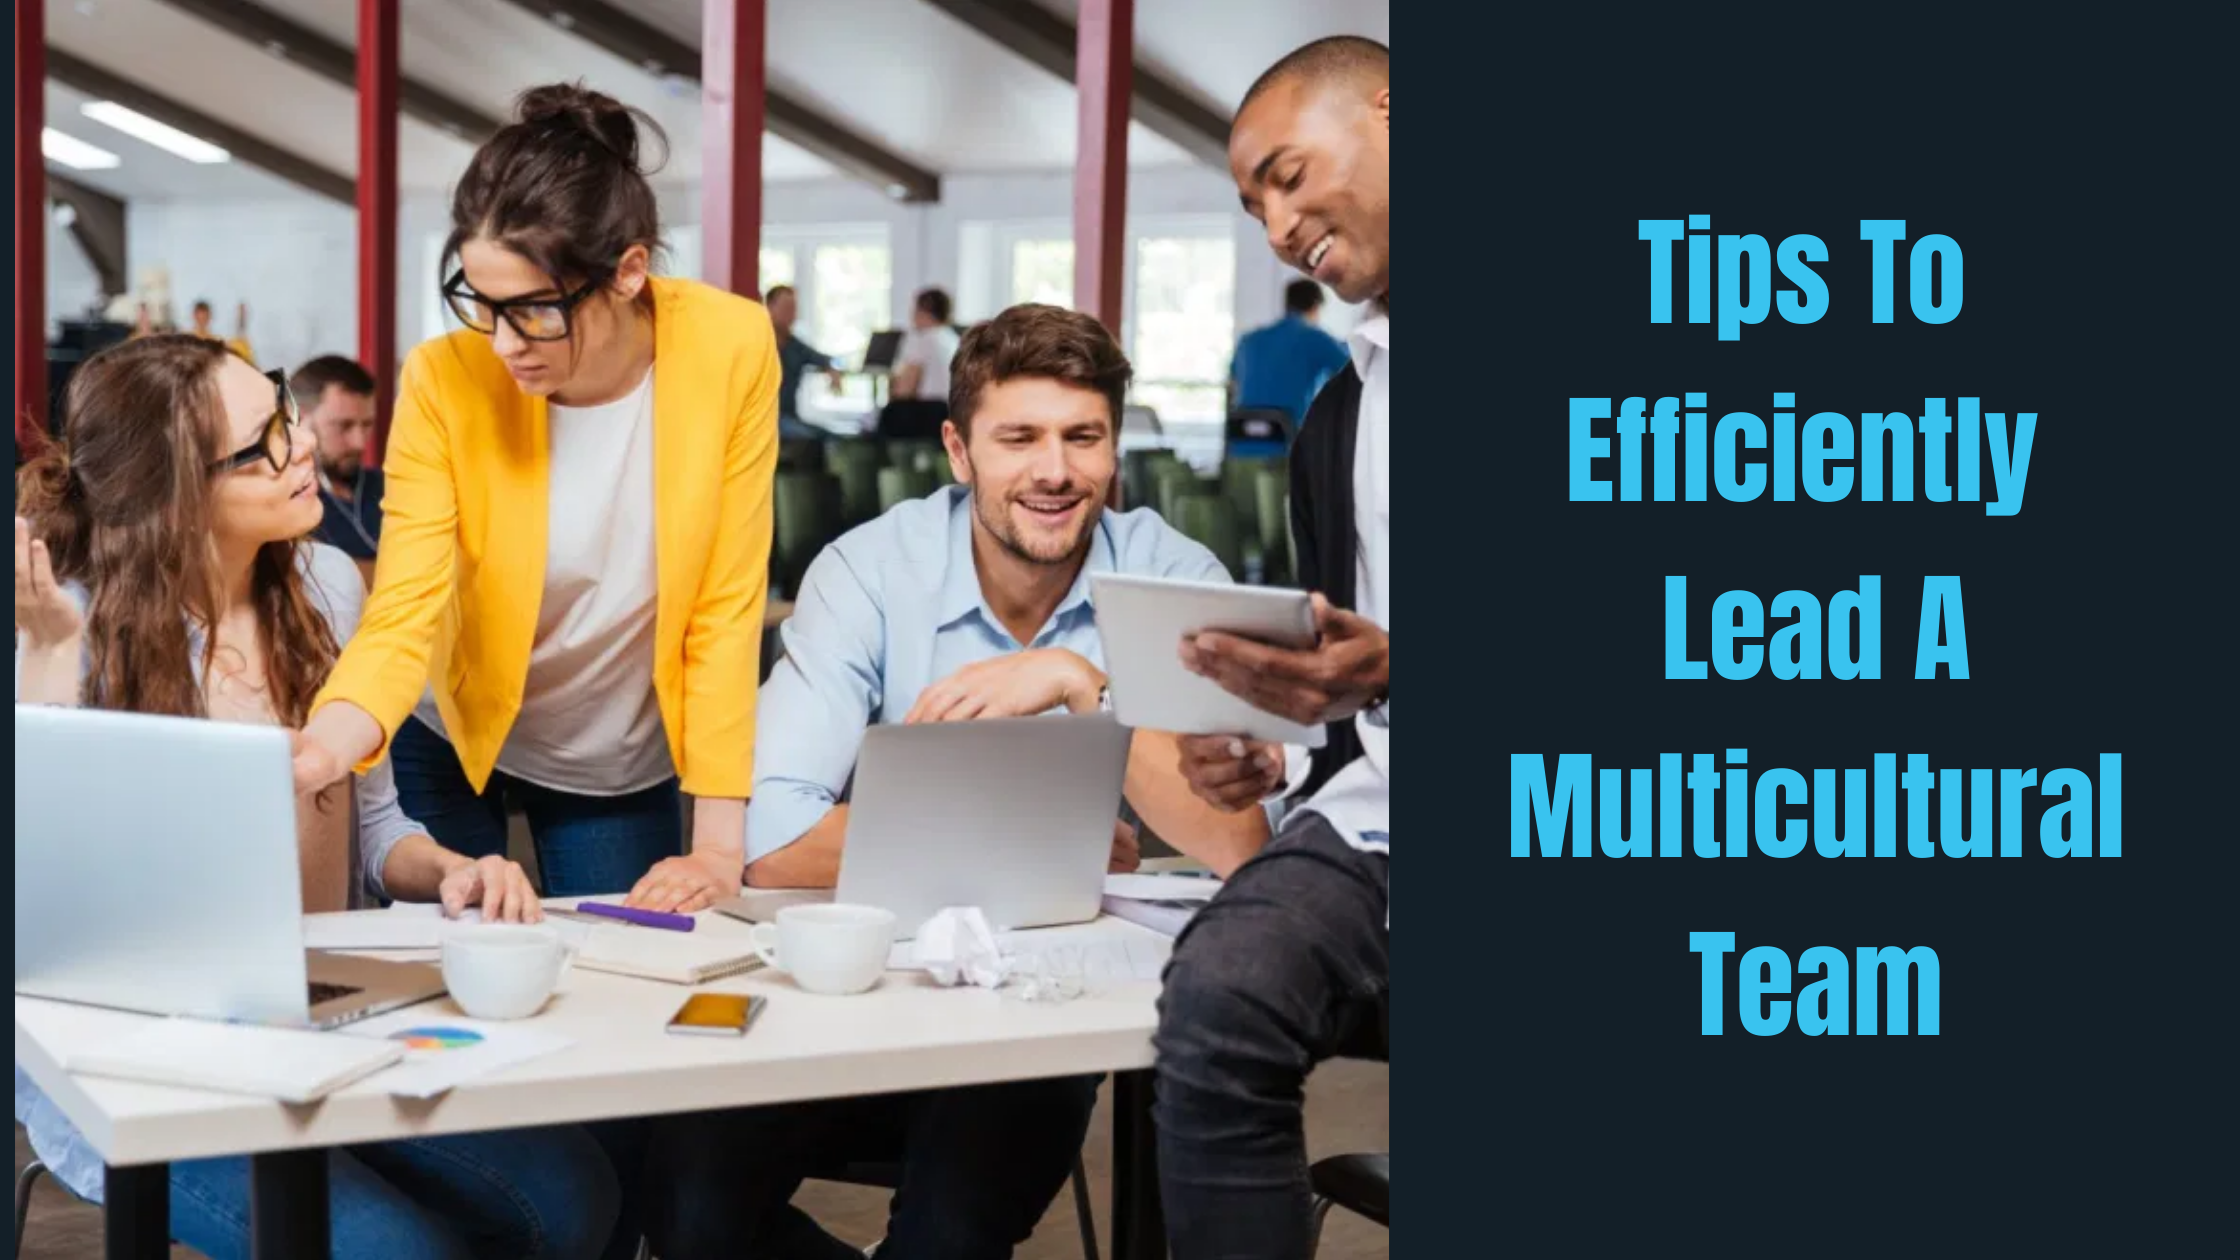 Tips To Efficiently Lead A Multicultural Team